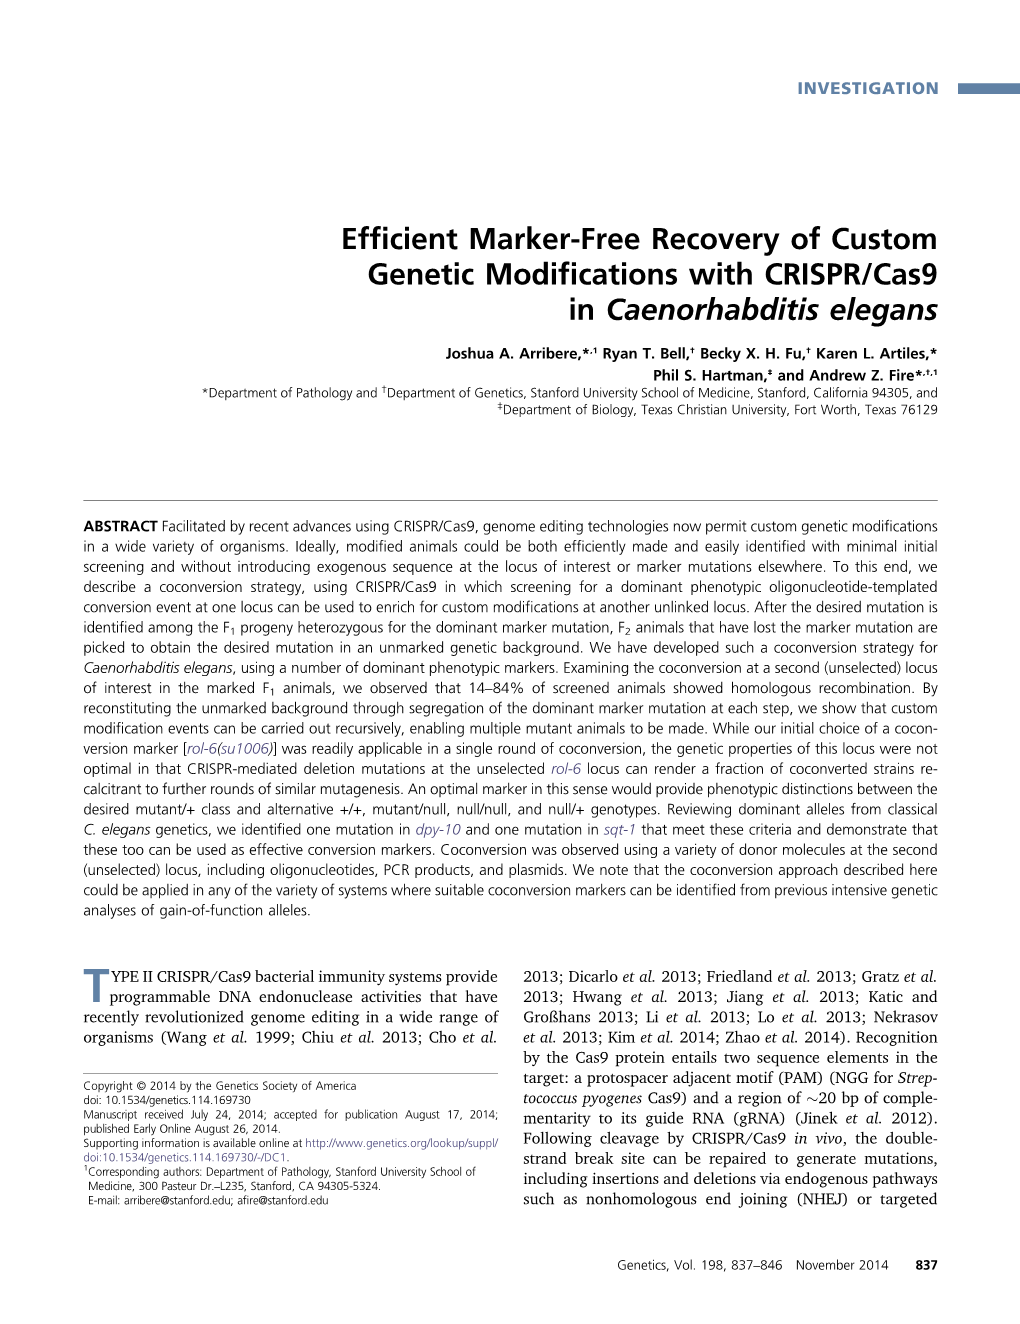 Efficient Marker-Free Recovery of Custom Genetic Modifications With